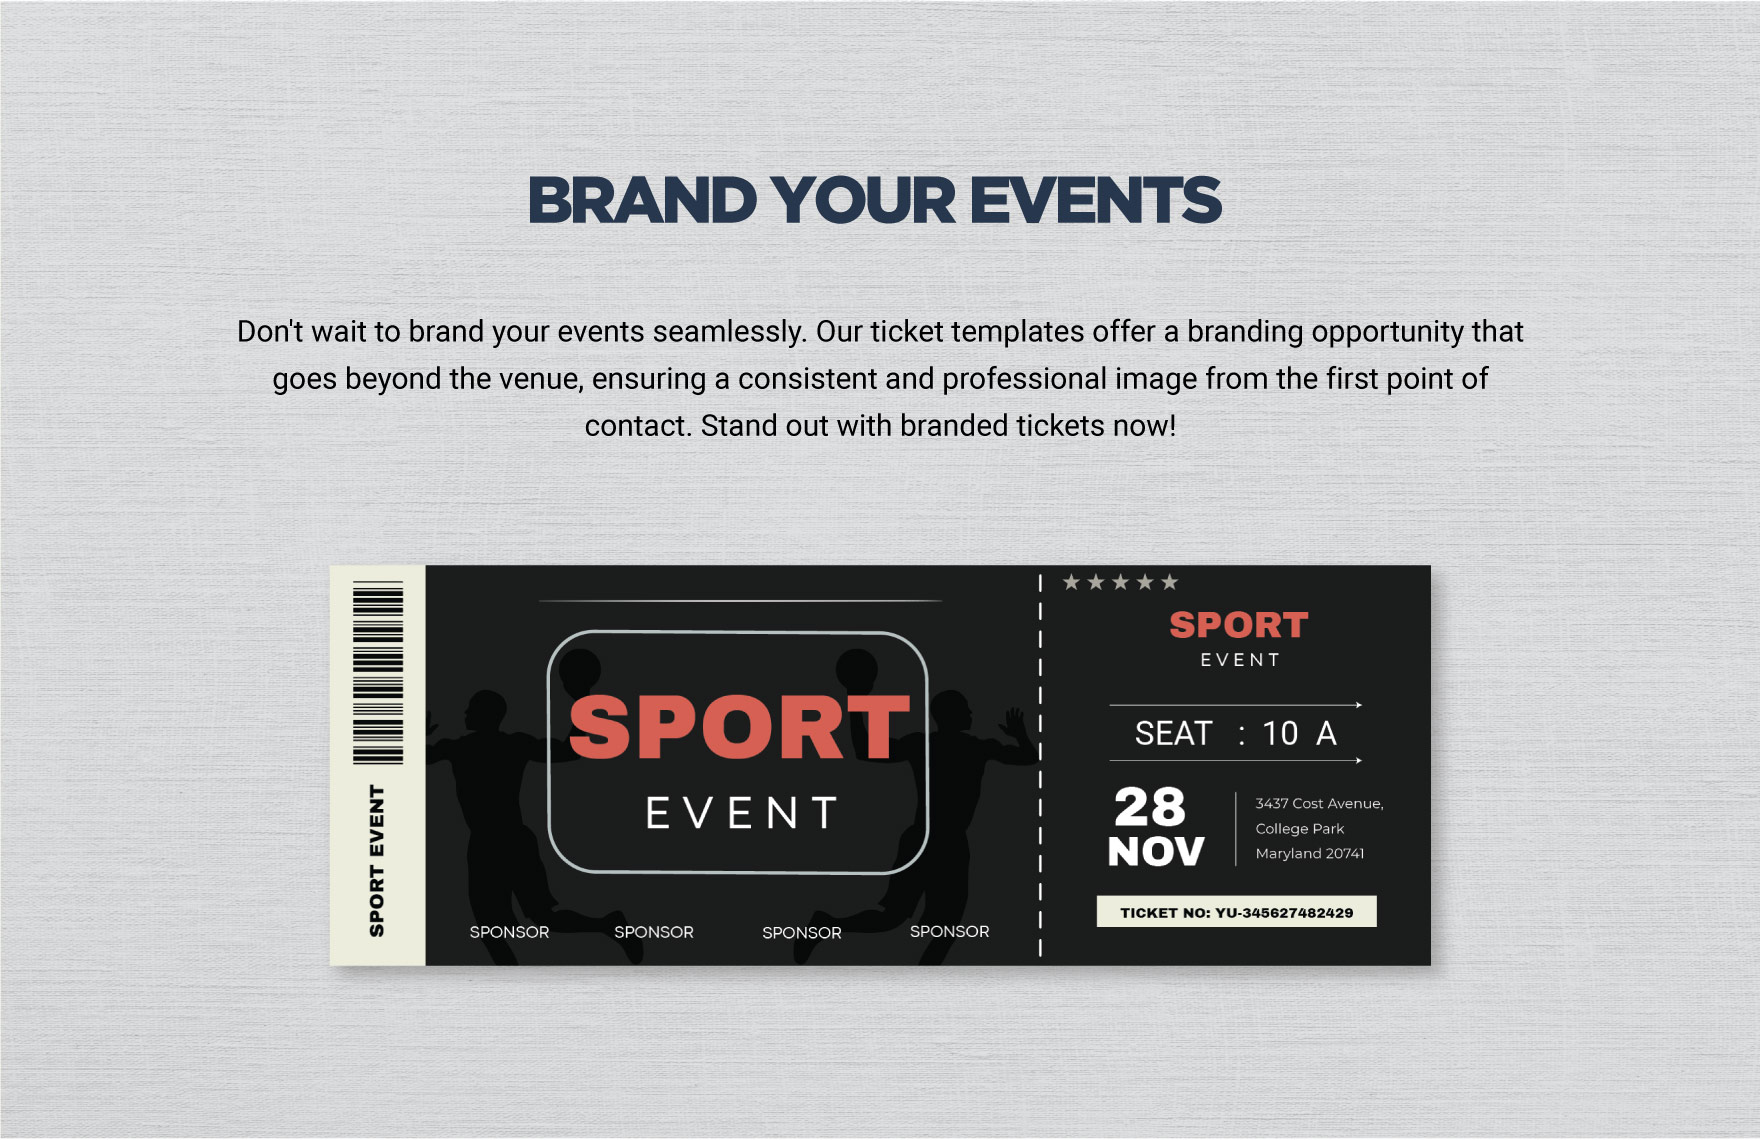 Sporting Event Ticket Template